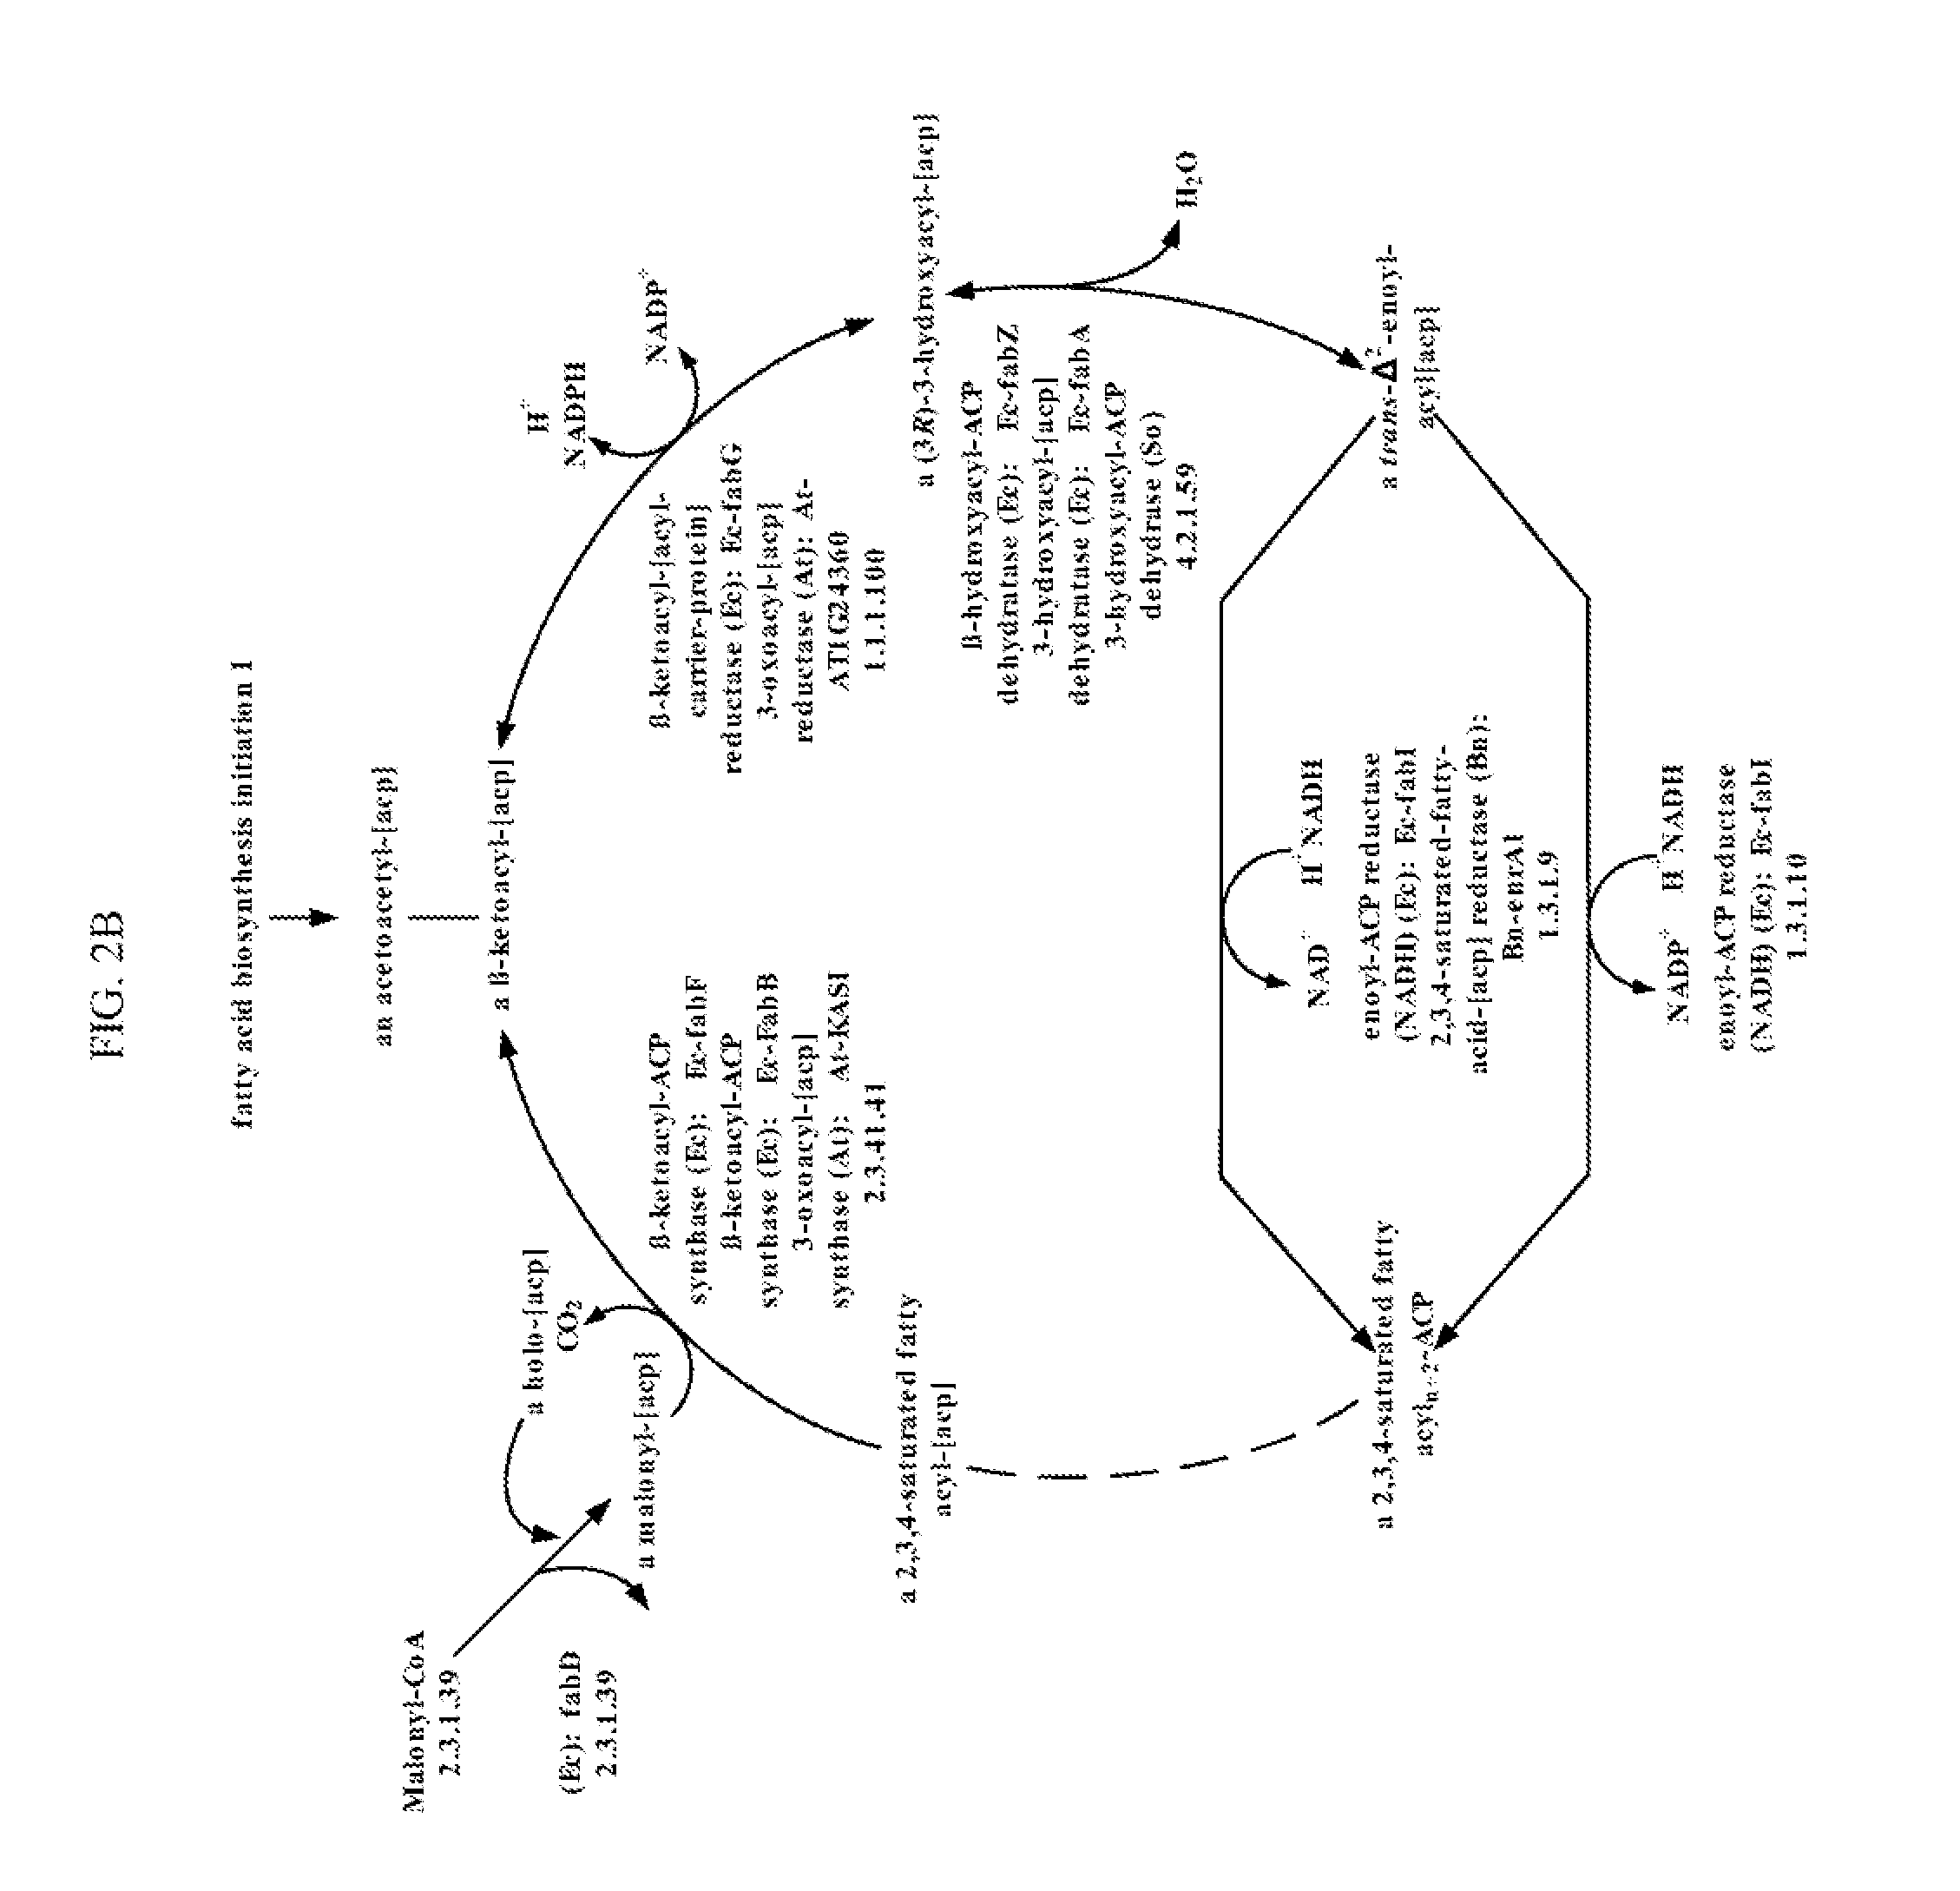 Methods for producing 3-hydroxypropionic acid and other products